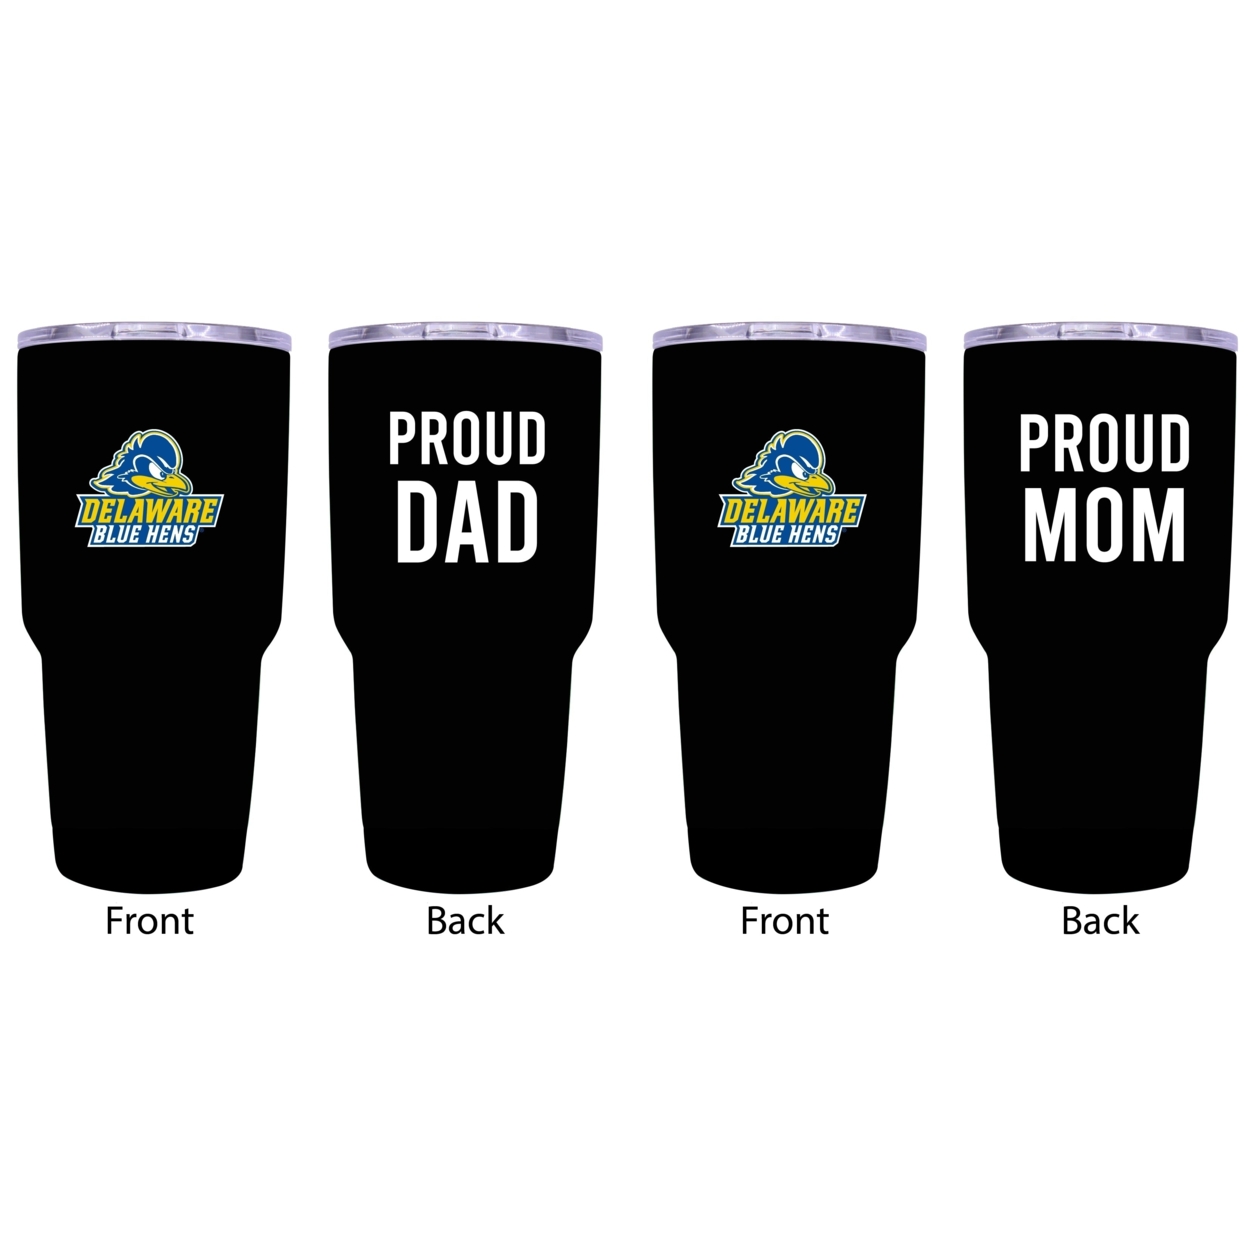 Delaware Blue Hens Proud Mom And Dad 24 Oz Insulated Stainless Steel Tumblers 2 Pack Black.